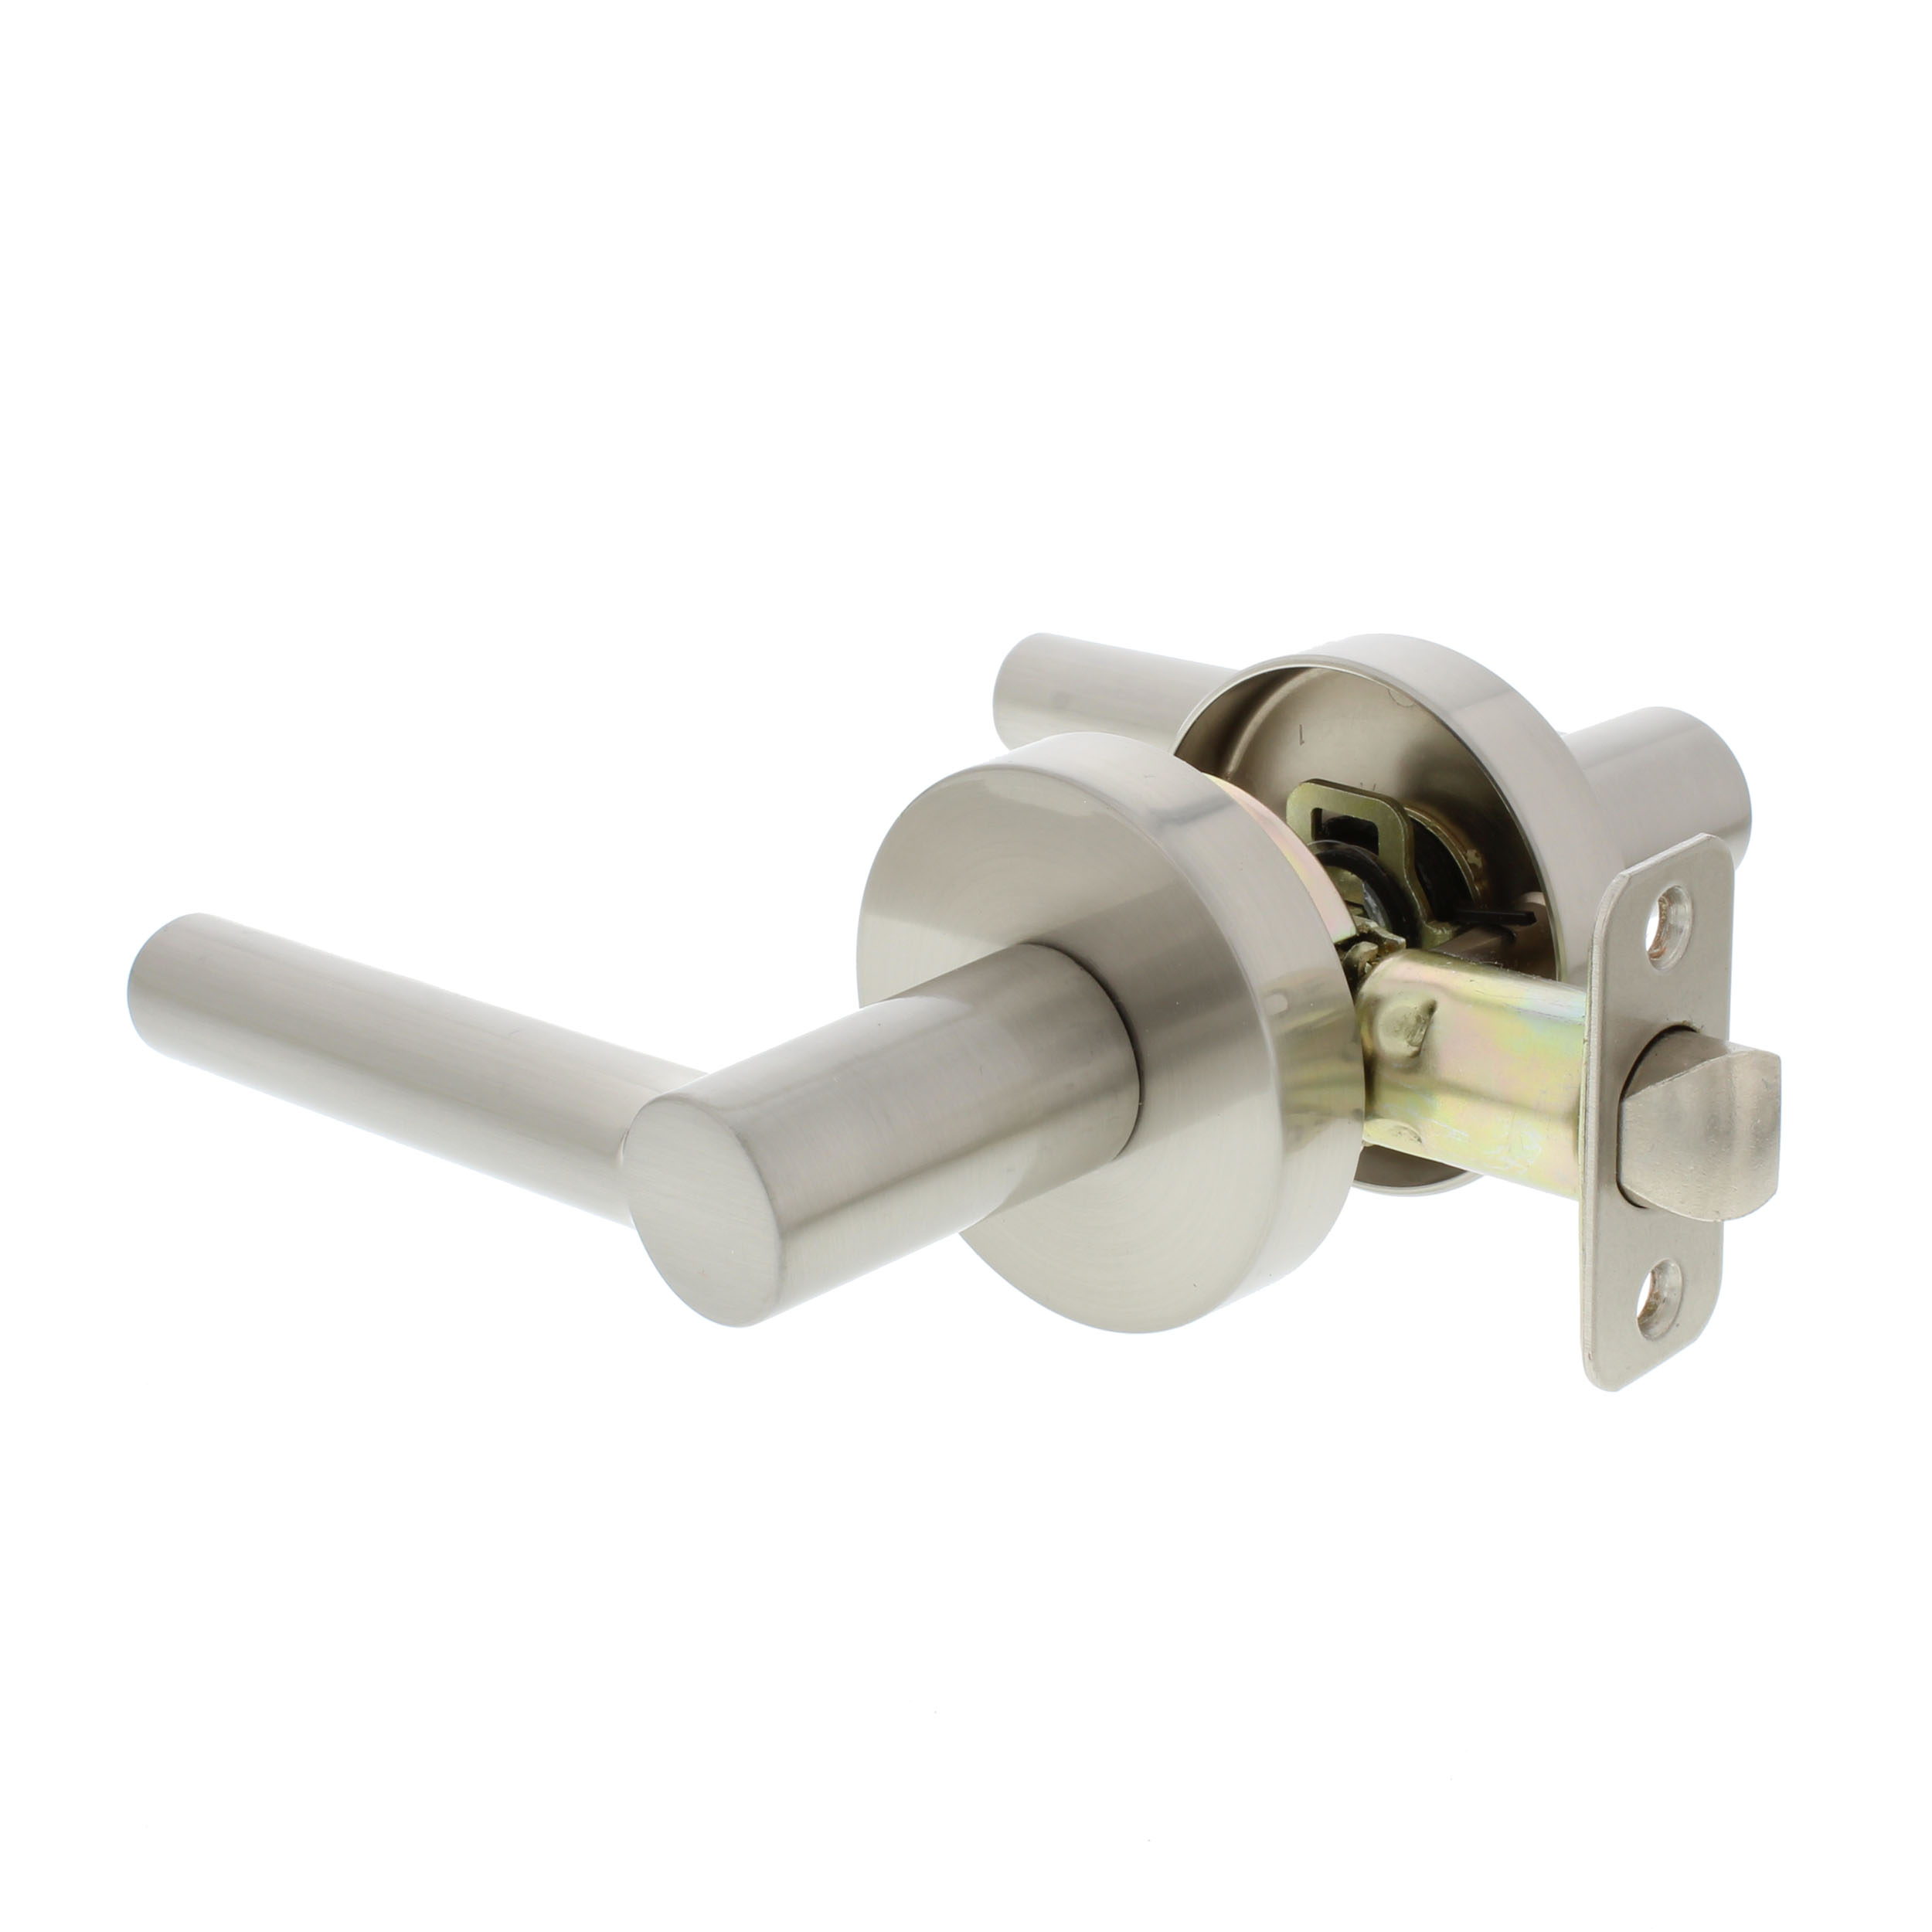 Ultra Security Windsor Hall/Closet Passage Round Rod Door Lever- Passage Lock Lever, Hall and Closet Lever (Satin Nickel, 1 Pack) - image 1 of 11